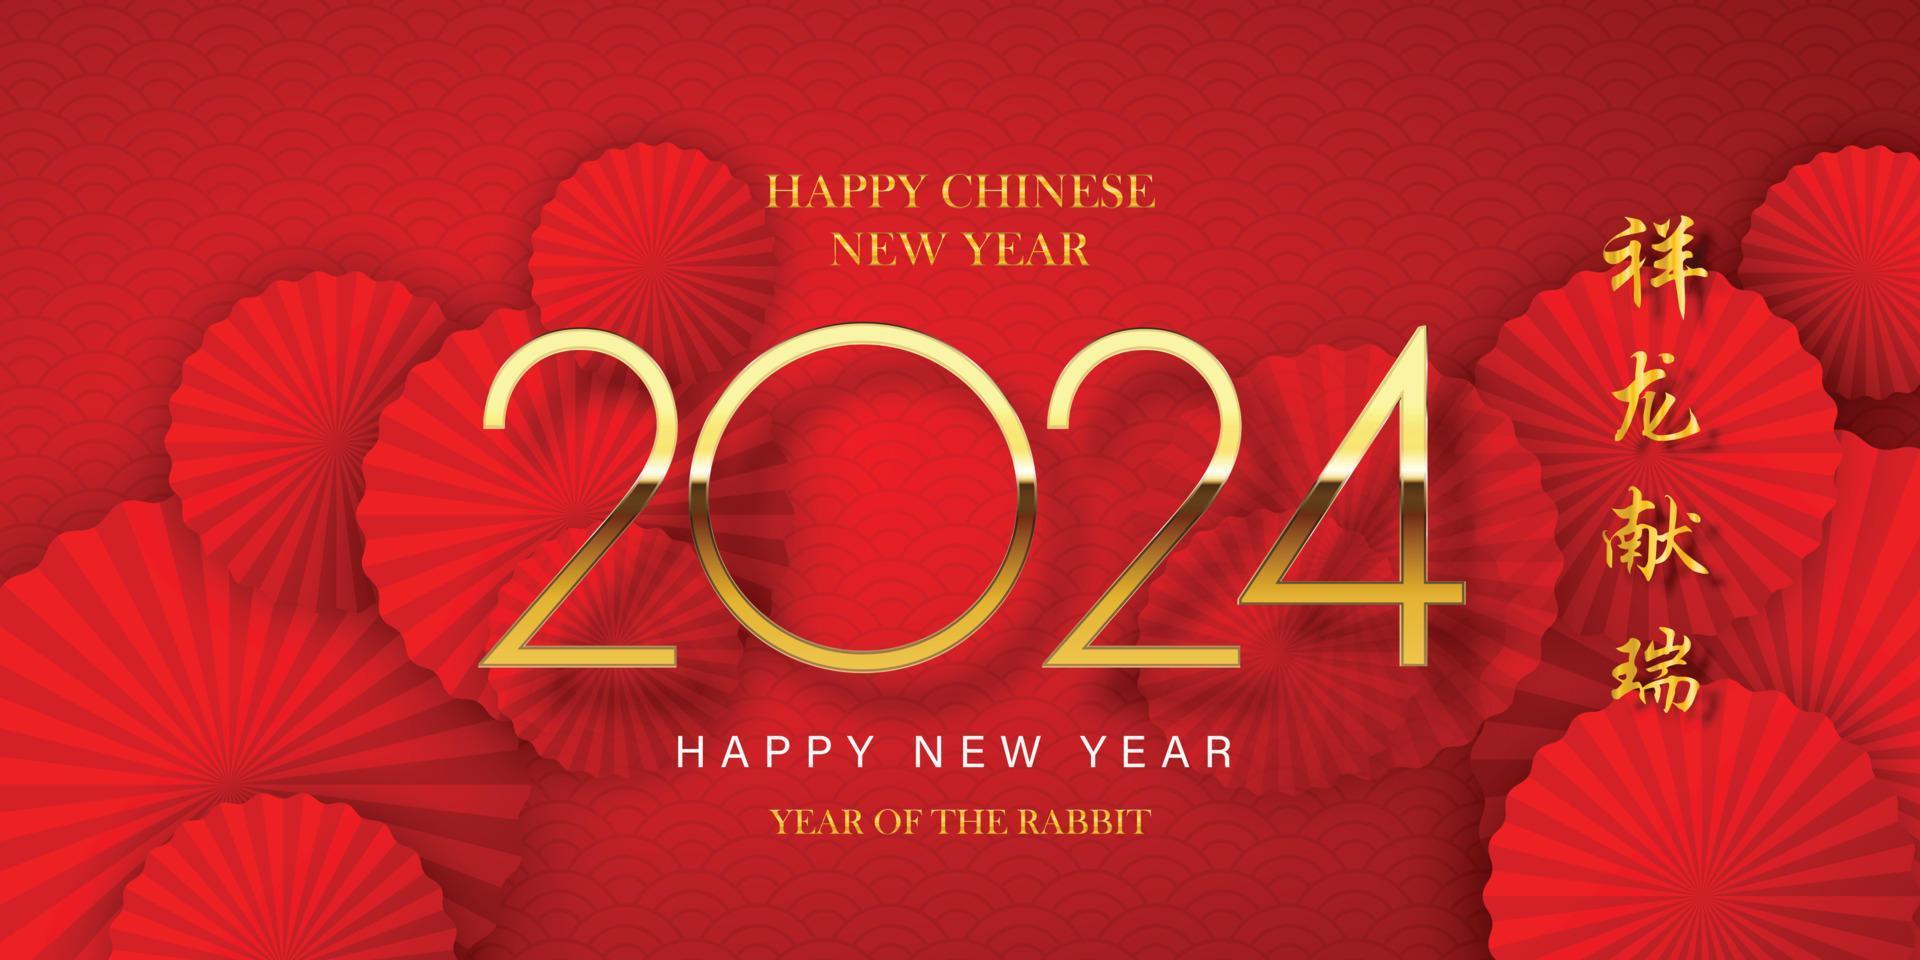 Happy Chinese New Year 2024, golden numbers on red background and fan. Chinese style, Chinese translation Chinese calendar for the rabbit of the year 2024 rabbit. vector